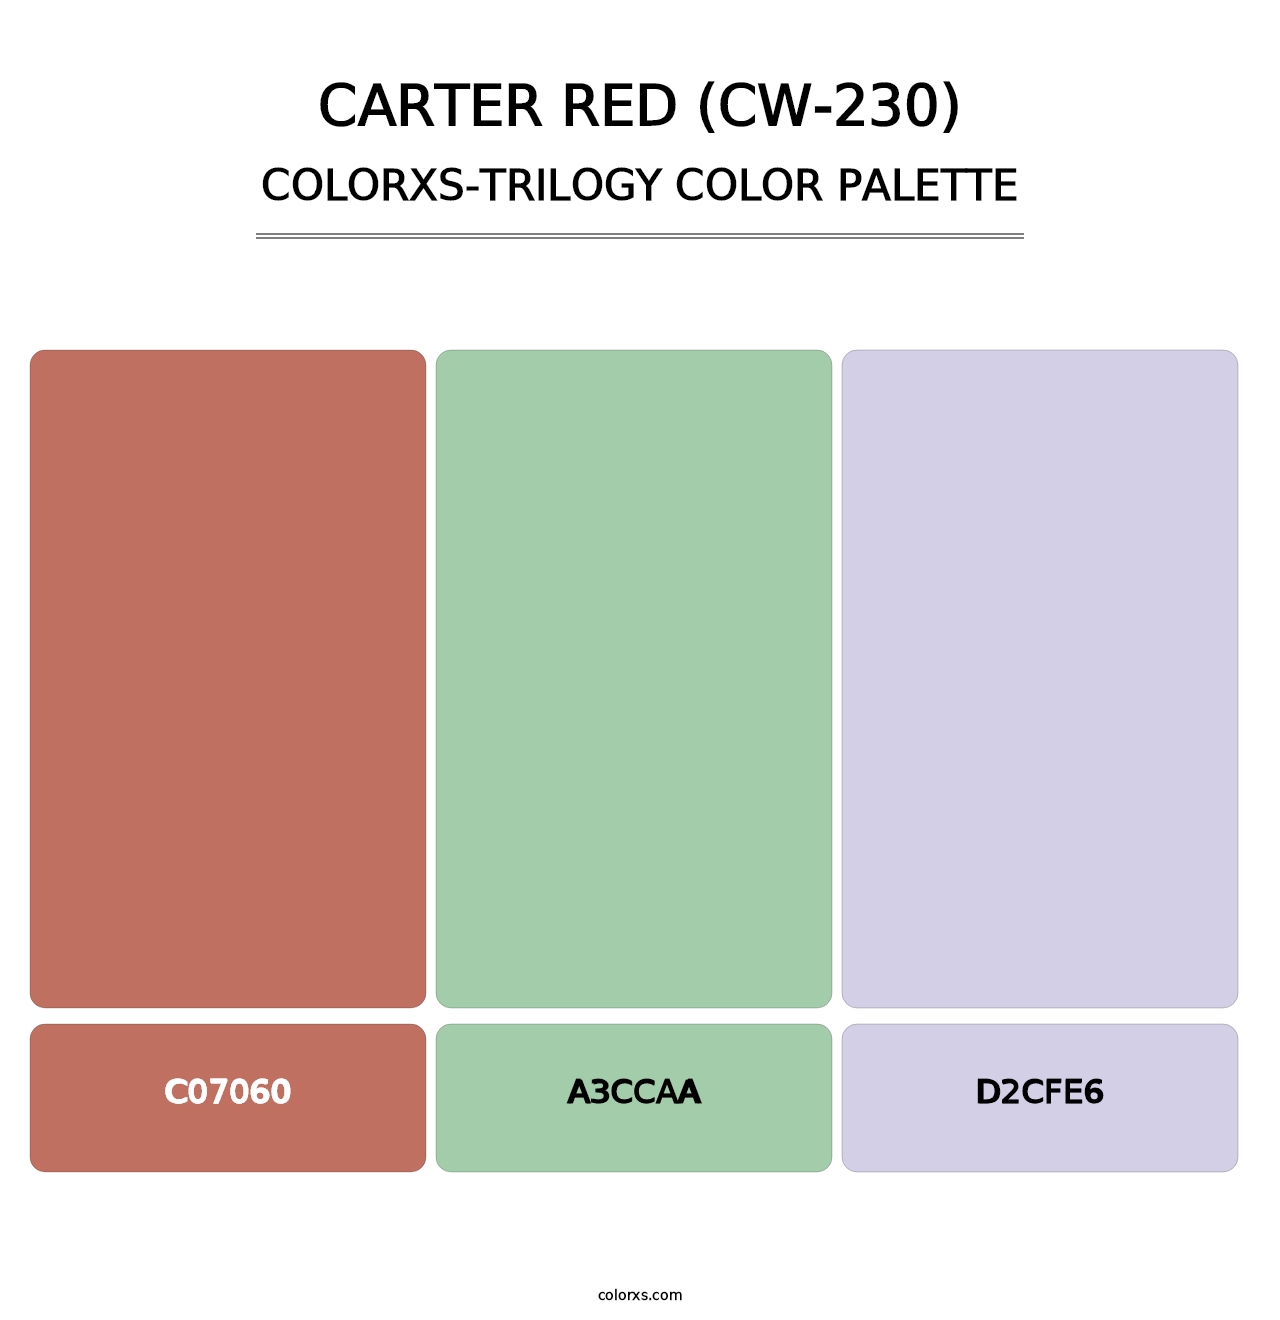 Carter Red (CW-230) - Colorxs Trilogy Palette